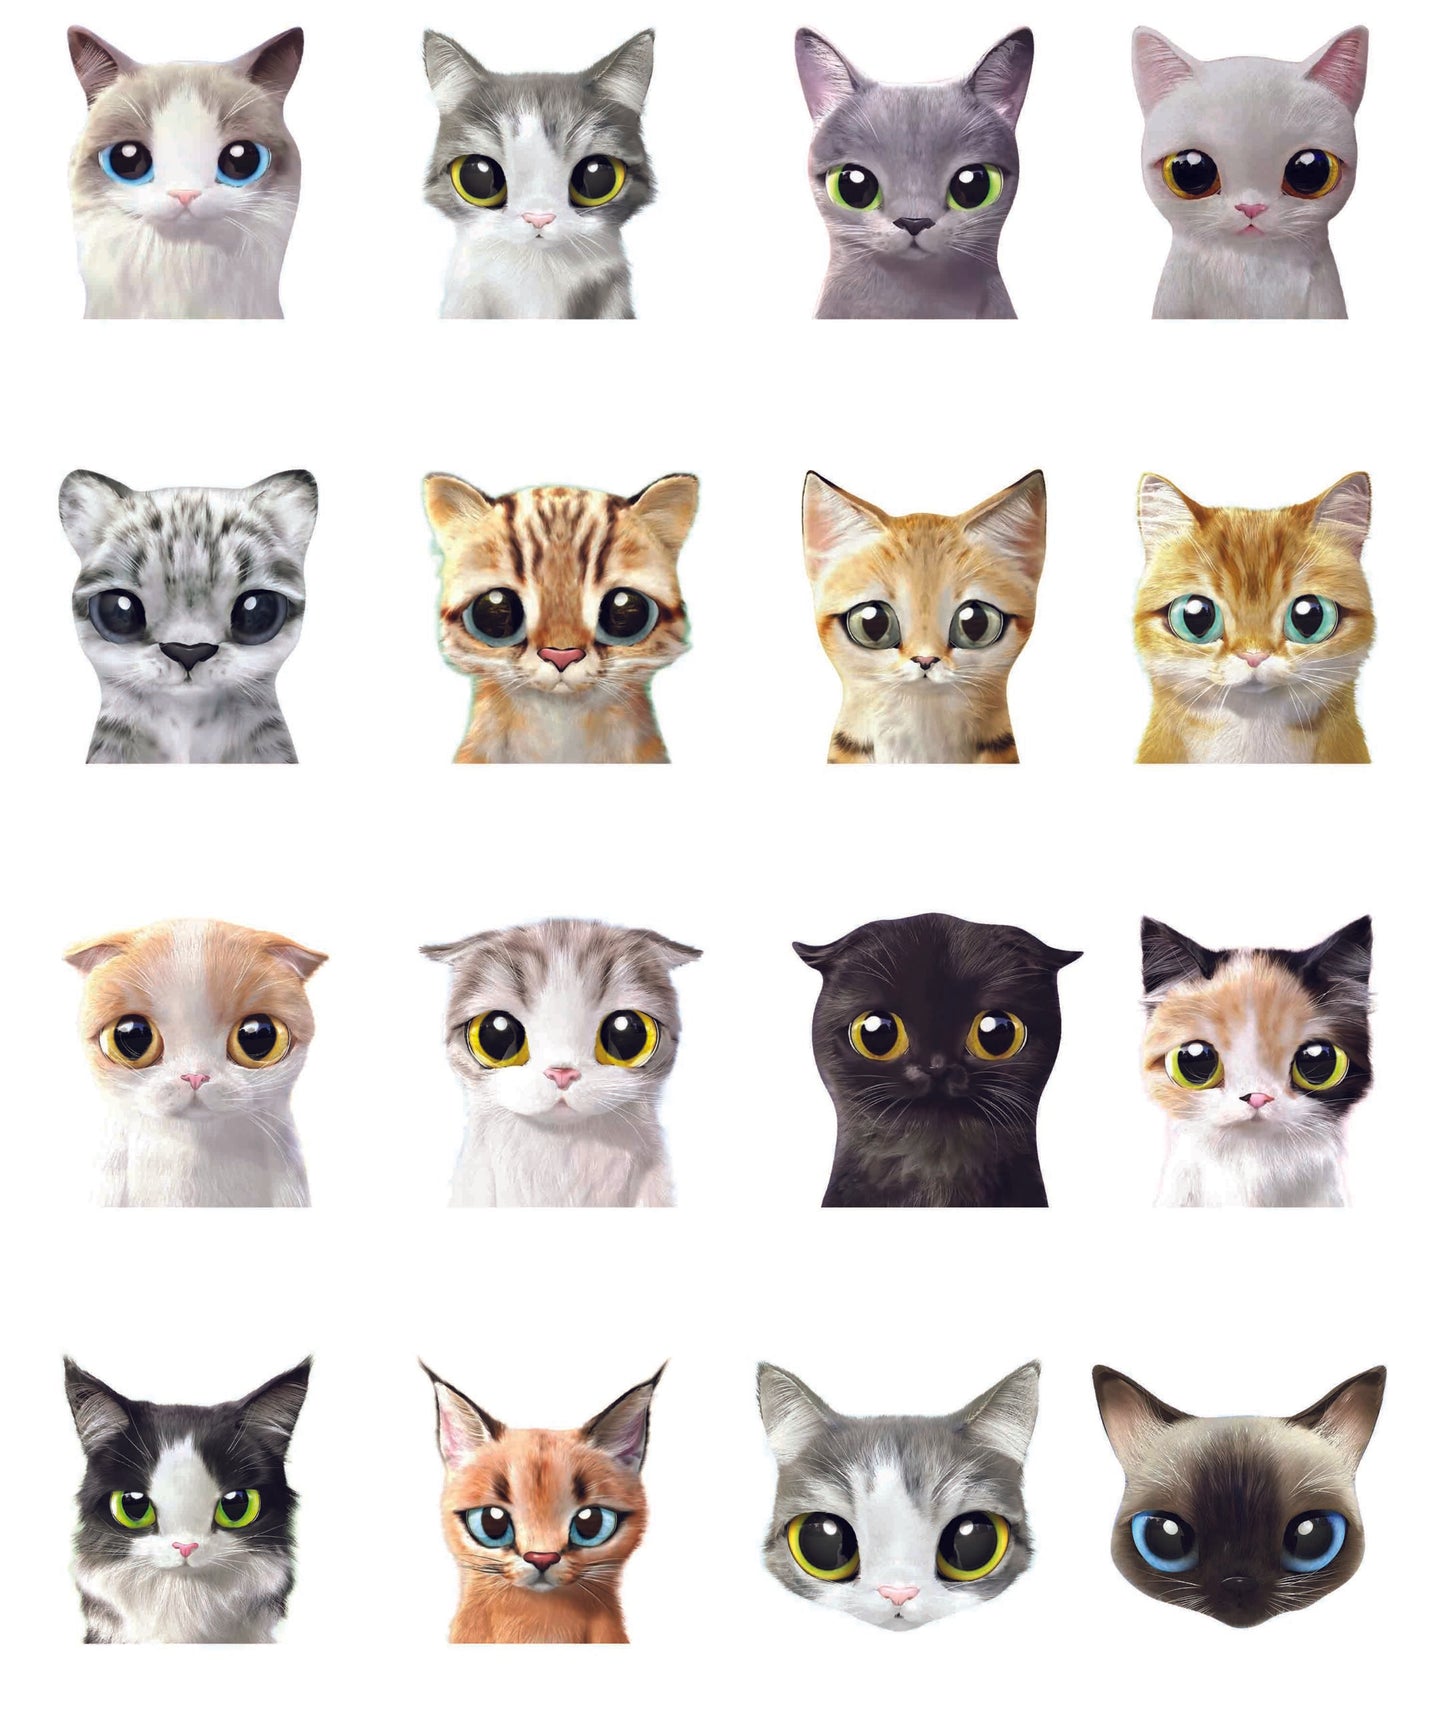 Cute Cuddly Cats Switchboard Sticker - Set of 16